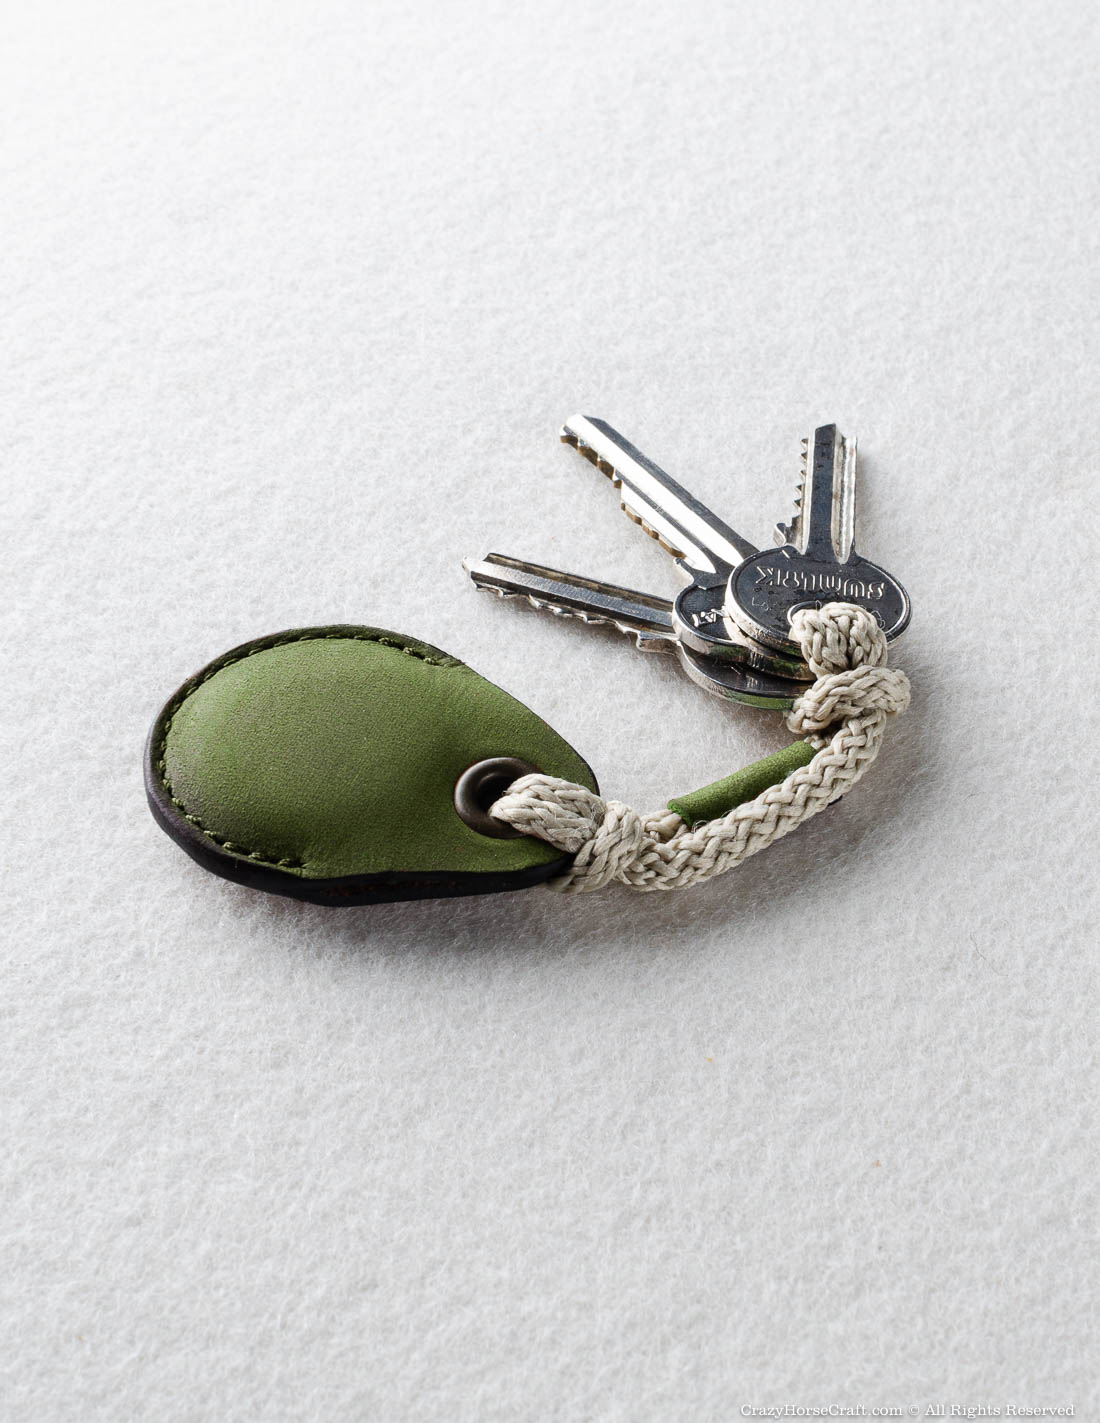 Veg-Tanned Leather AirTag Holder / Case / Key Tag | Alpine Green